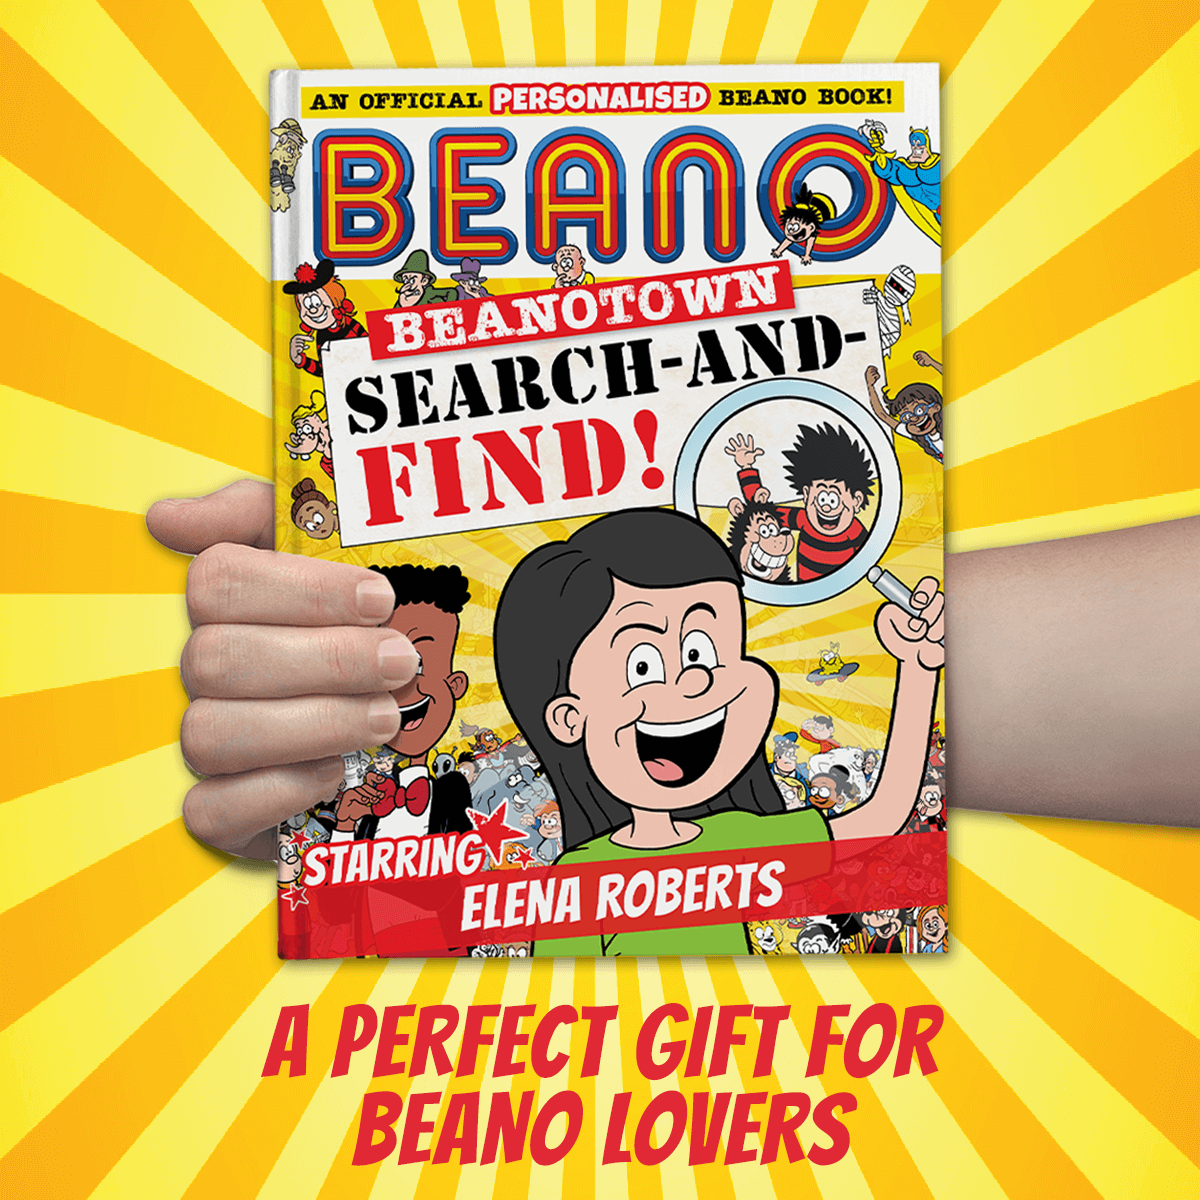 Beanotown: Search and Find